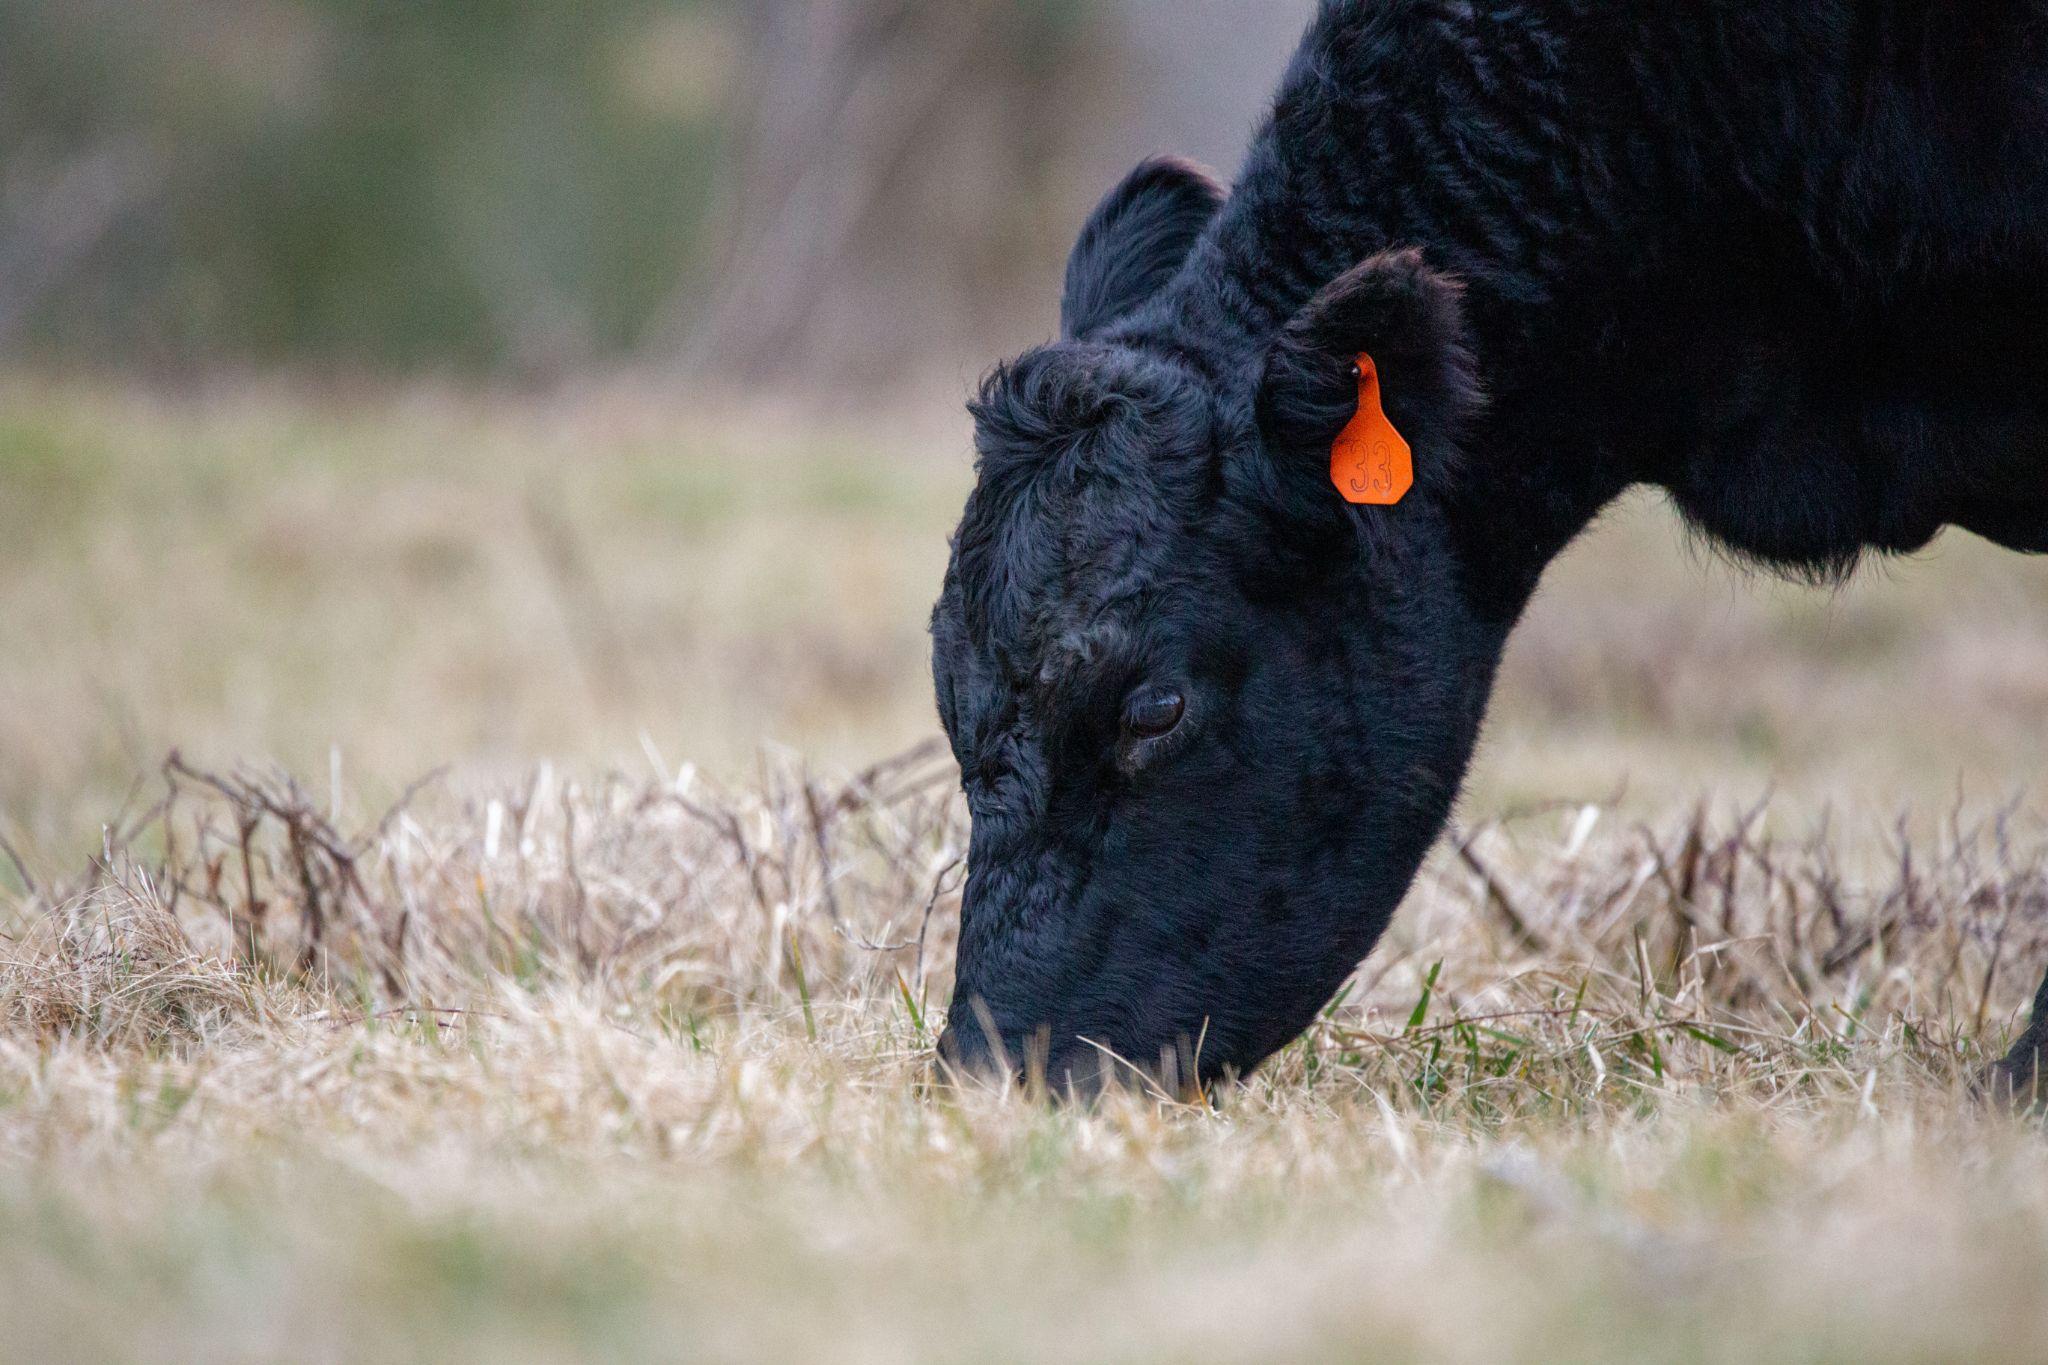 A black Angus cow grazing in a field with an orange tag.